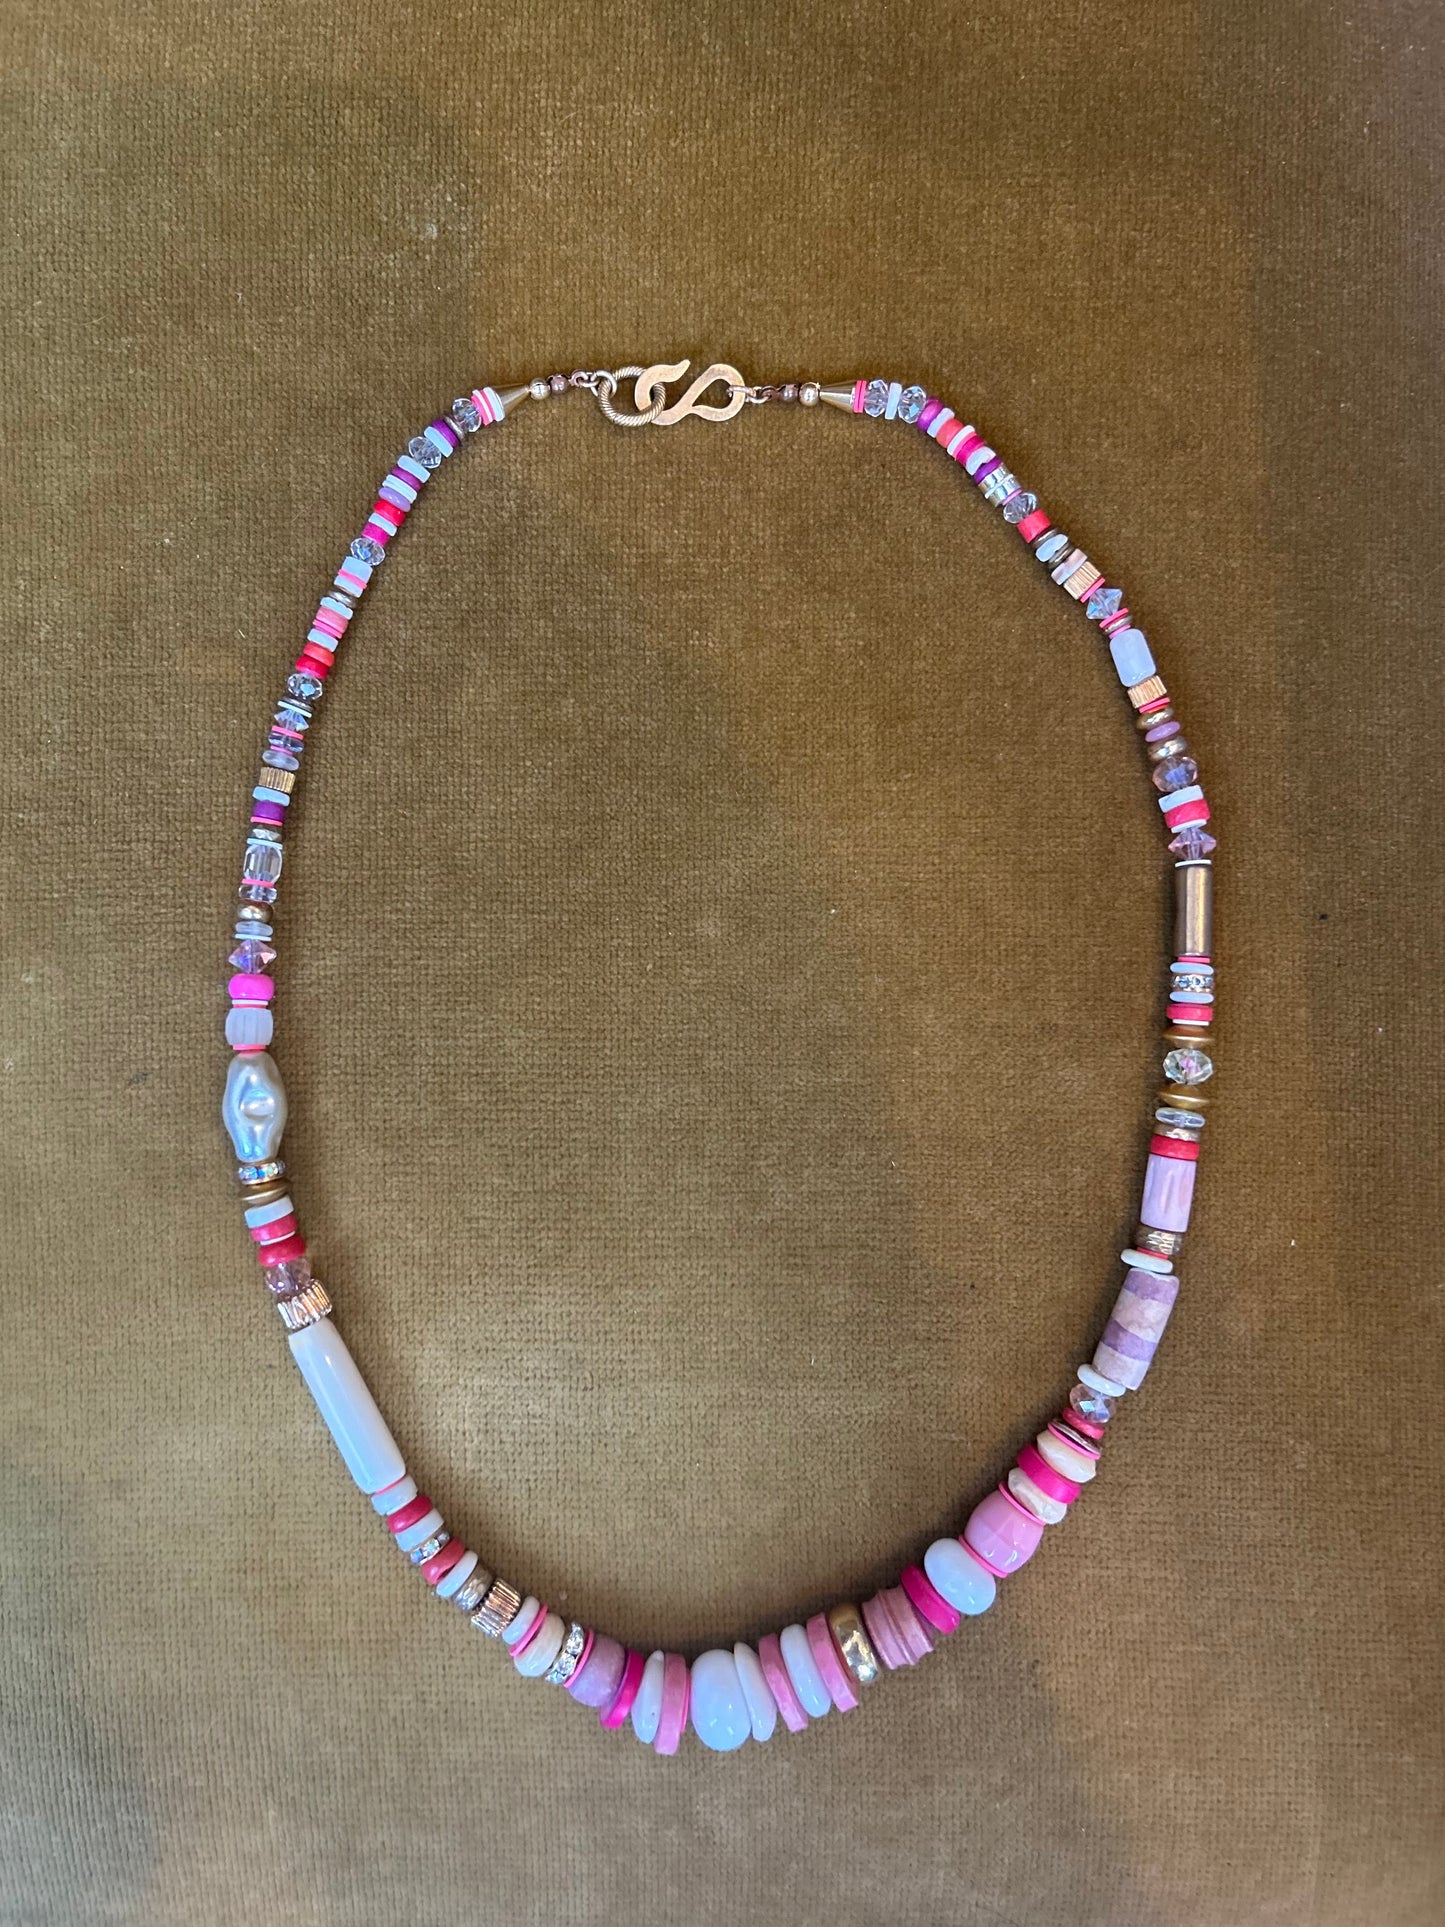 Pink on Pink on White on Gold Beaded Necklace